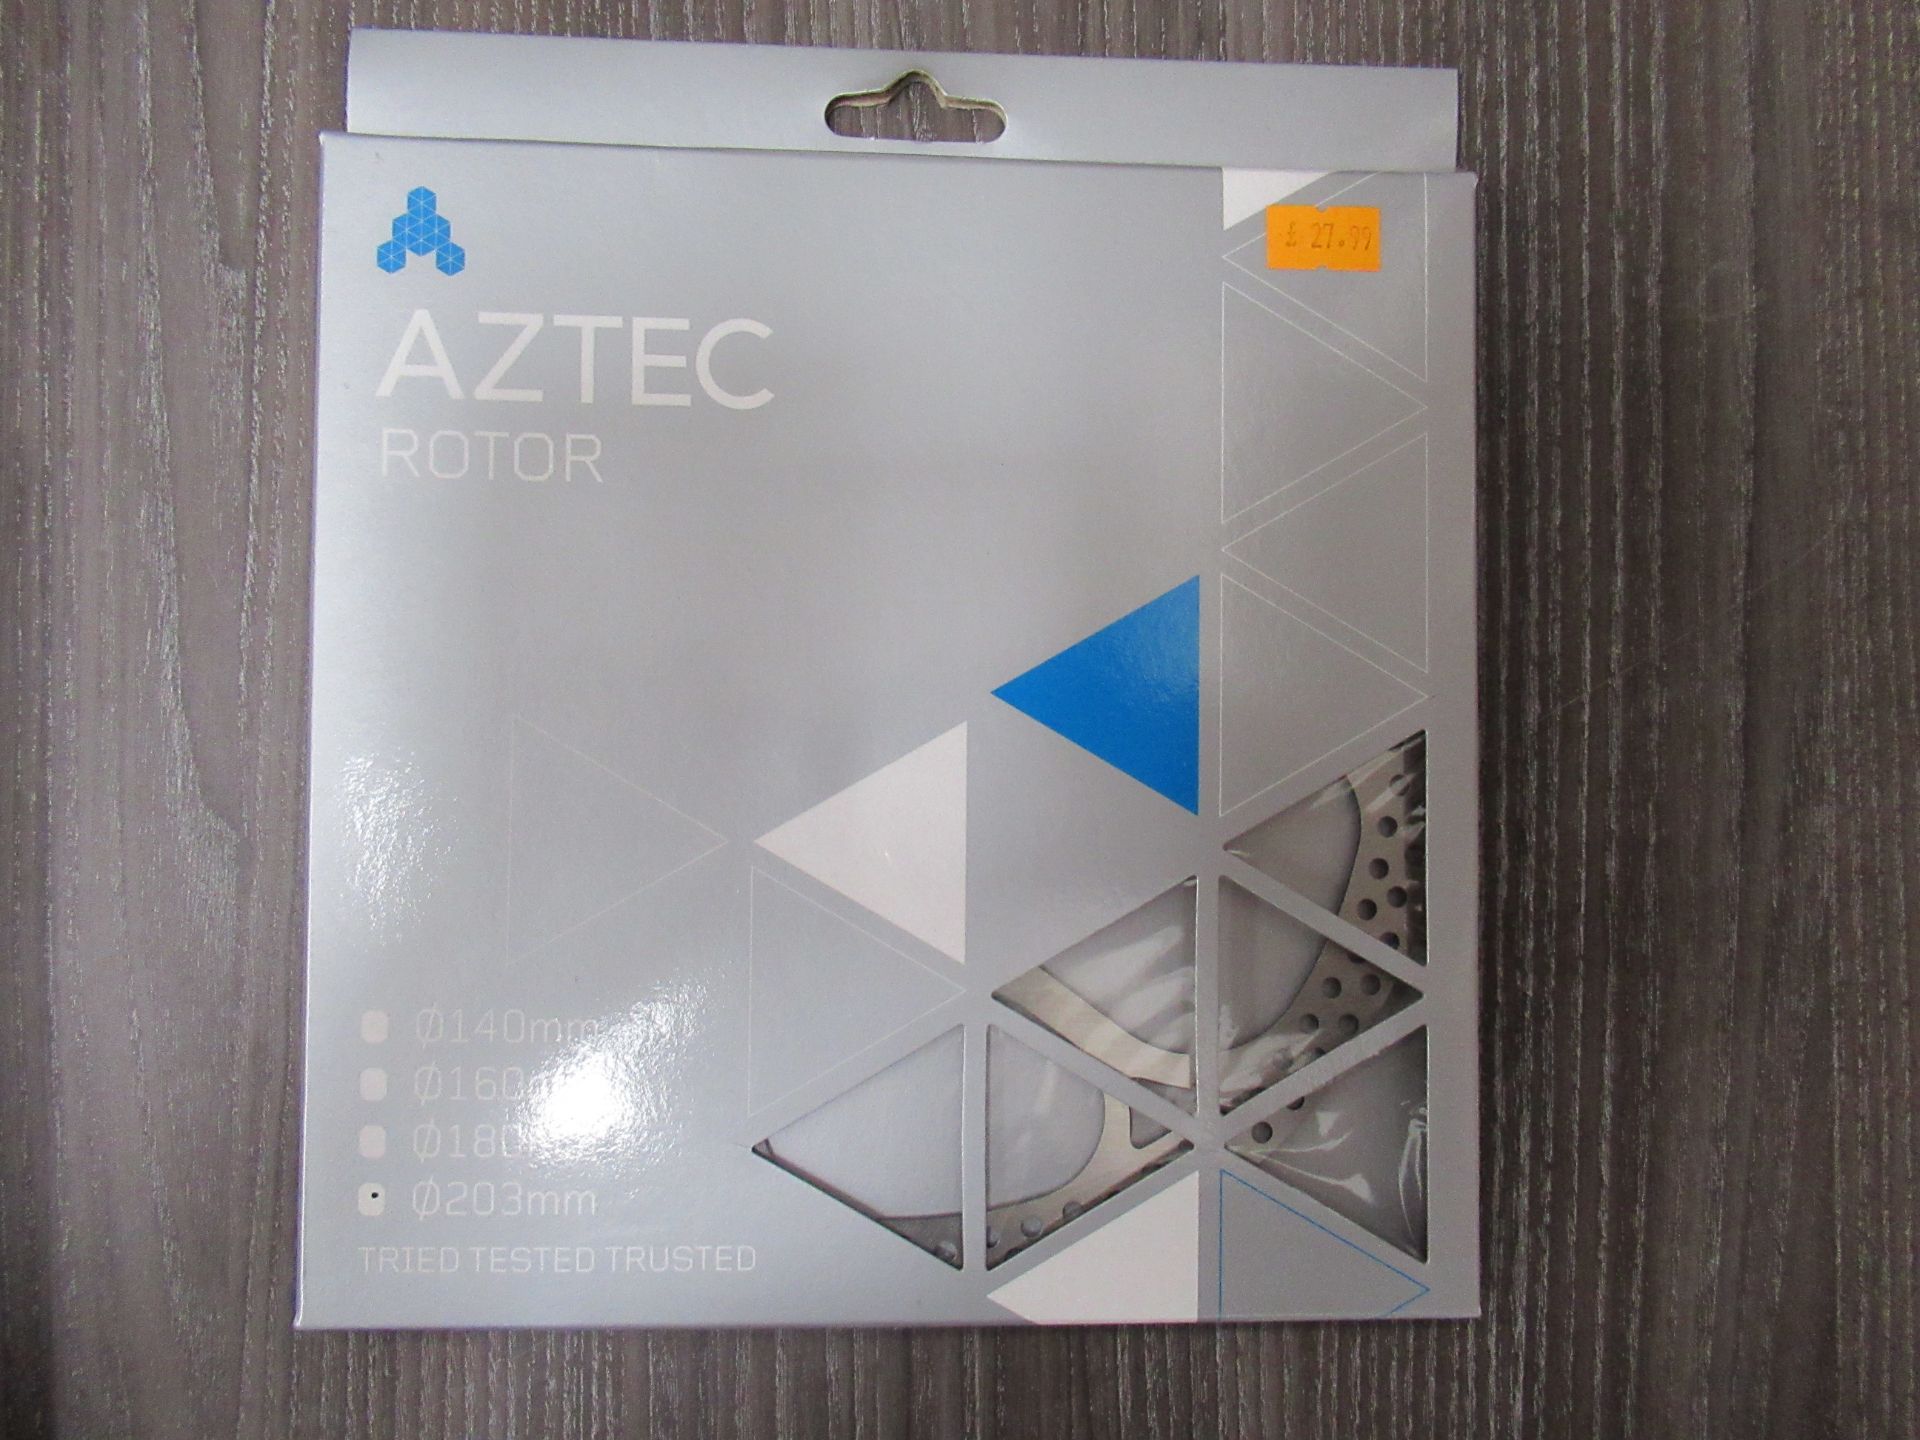 4 x Aztec Rotor's: 2 x 160mm (RRP£22.99); 1 x 180mm (RRP£25.99) and 1 x 203mm (RRP£27.99) - Image 8 of 9